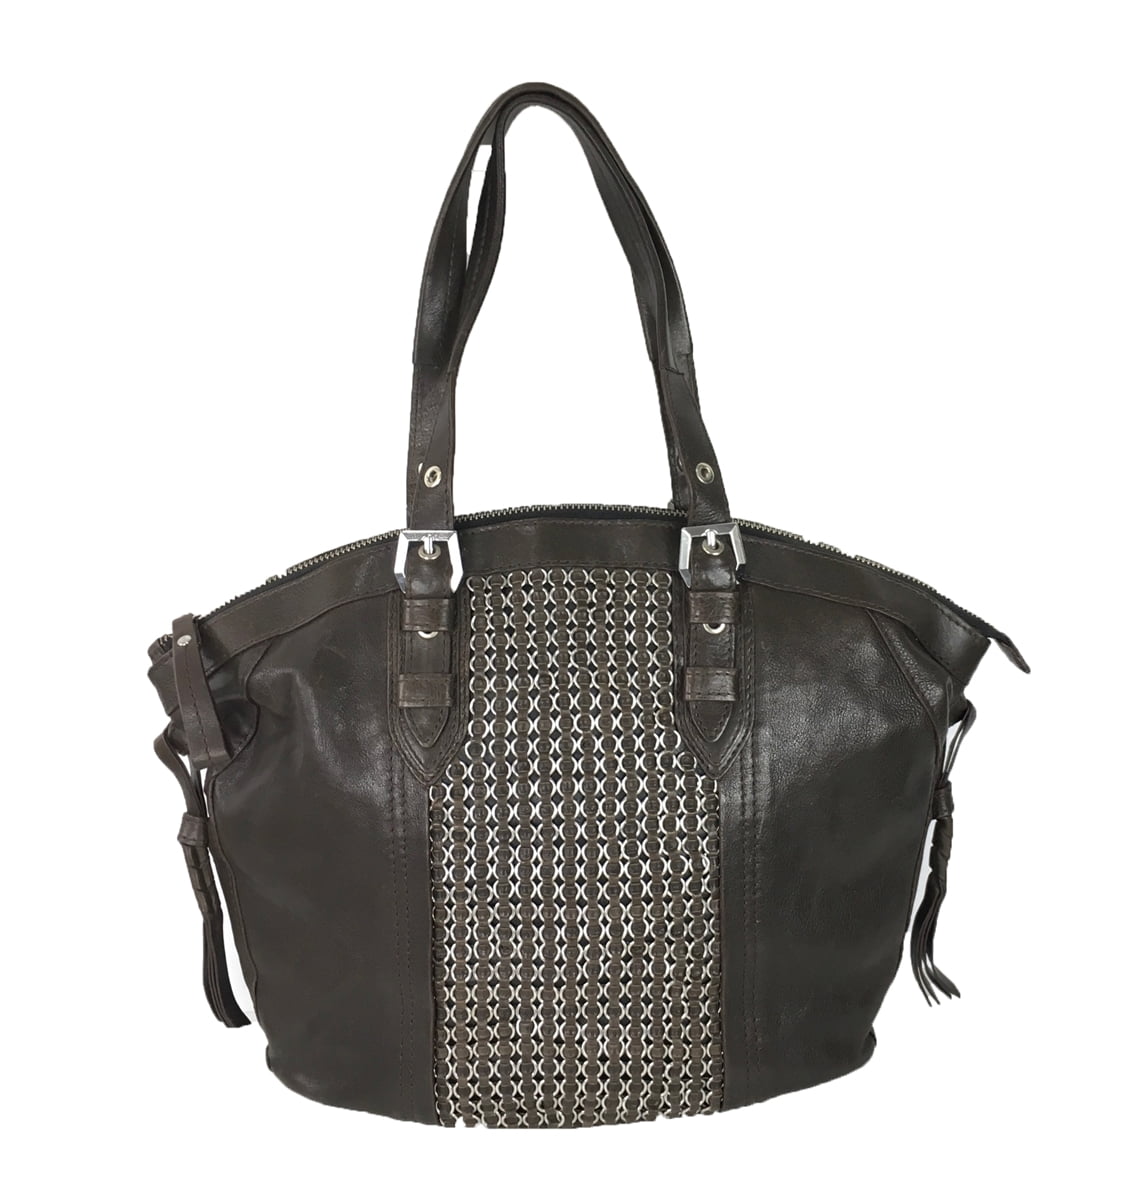 orYANY Betsy Leather Chainmail Tote Bag, Brown - Walmart.com